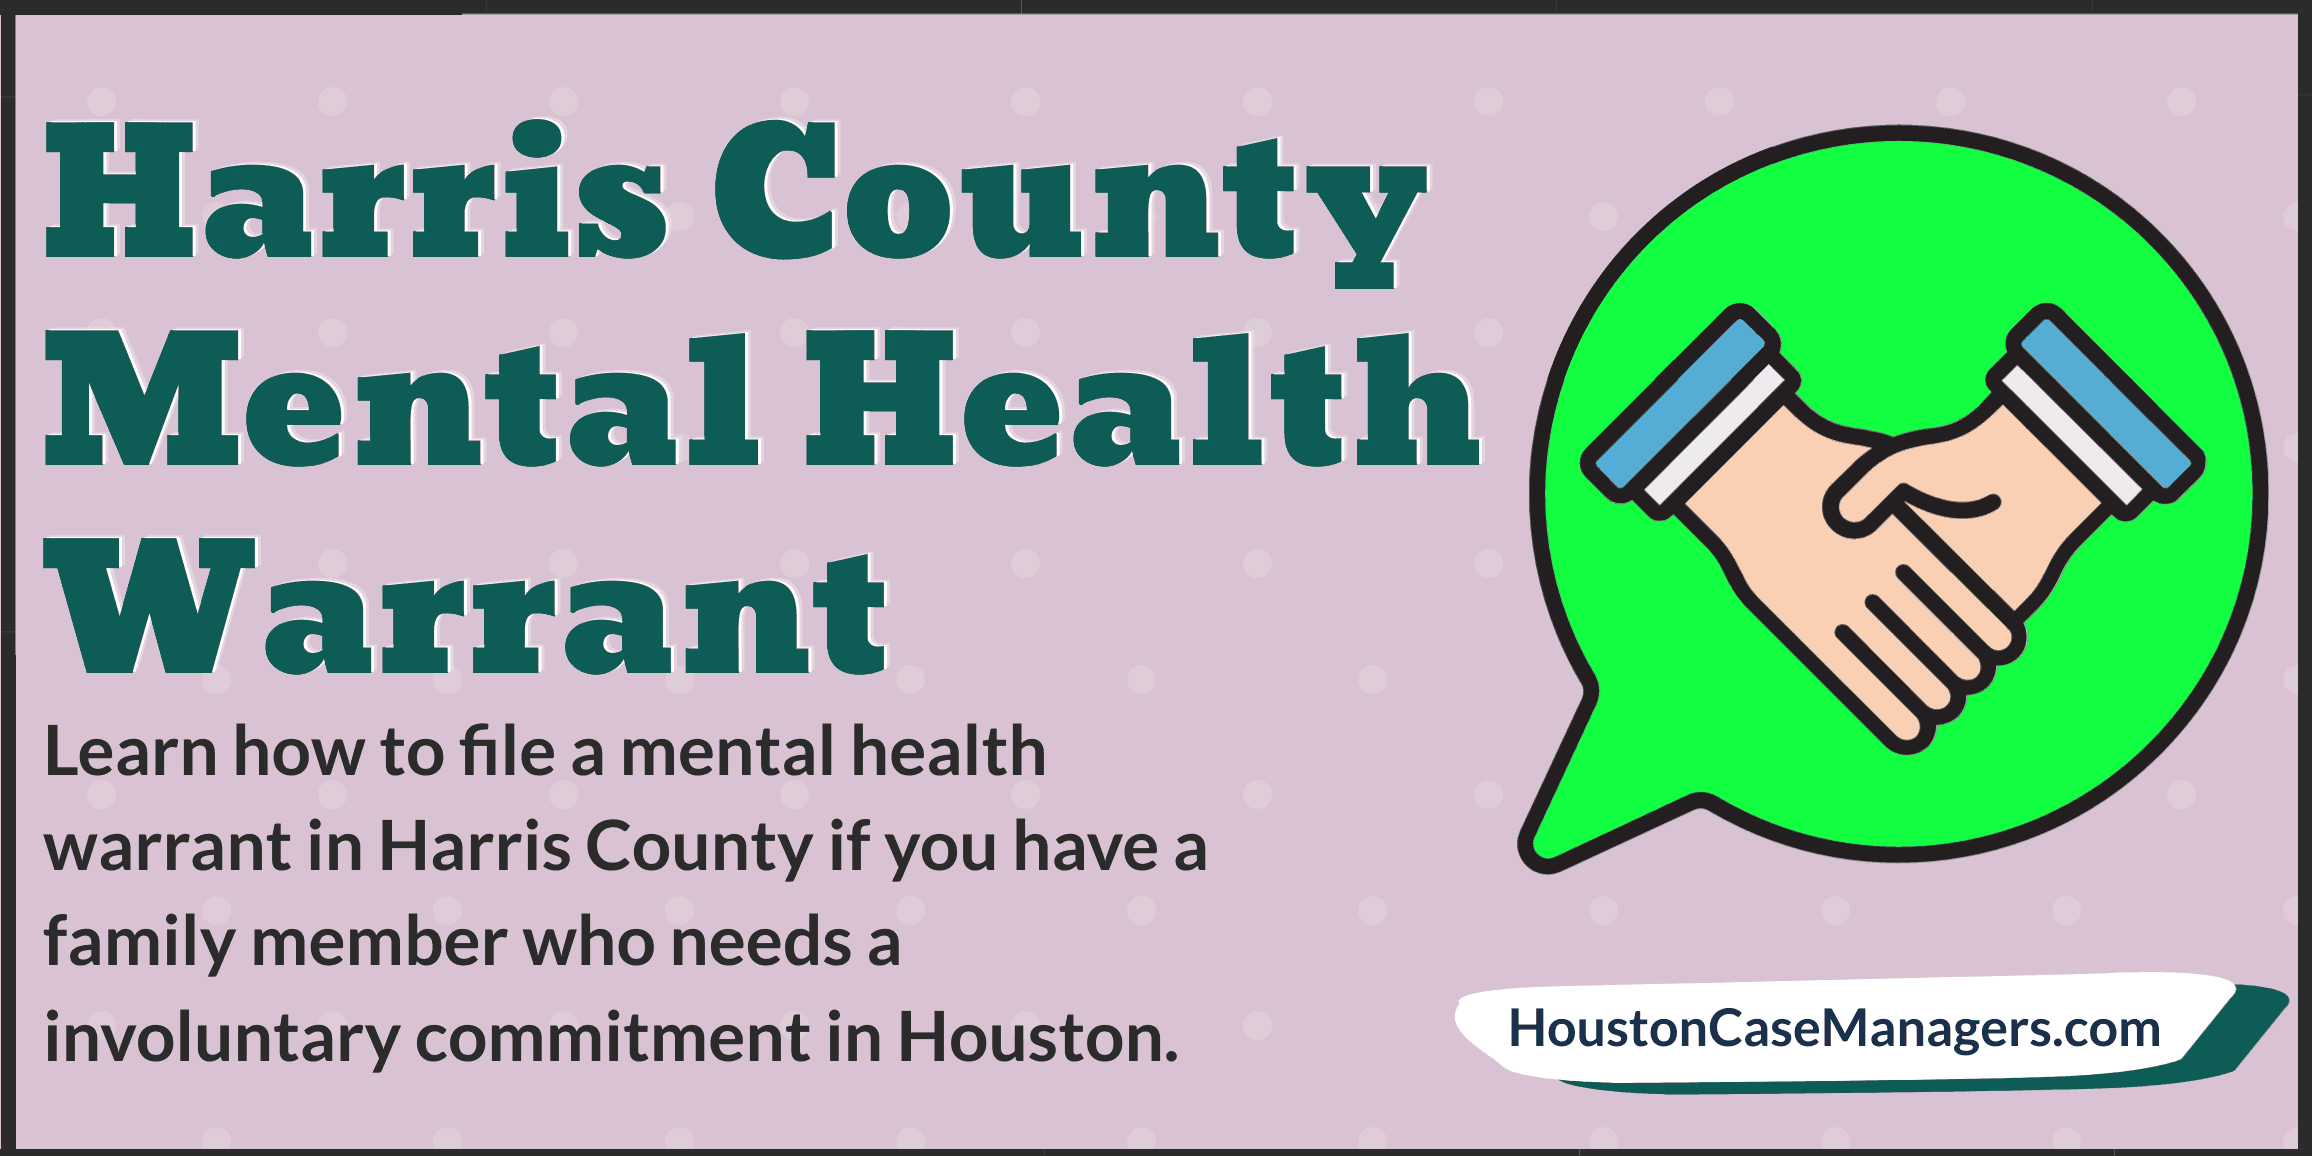 What is a Mental Health Warrant?